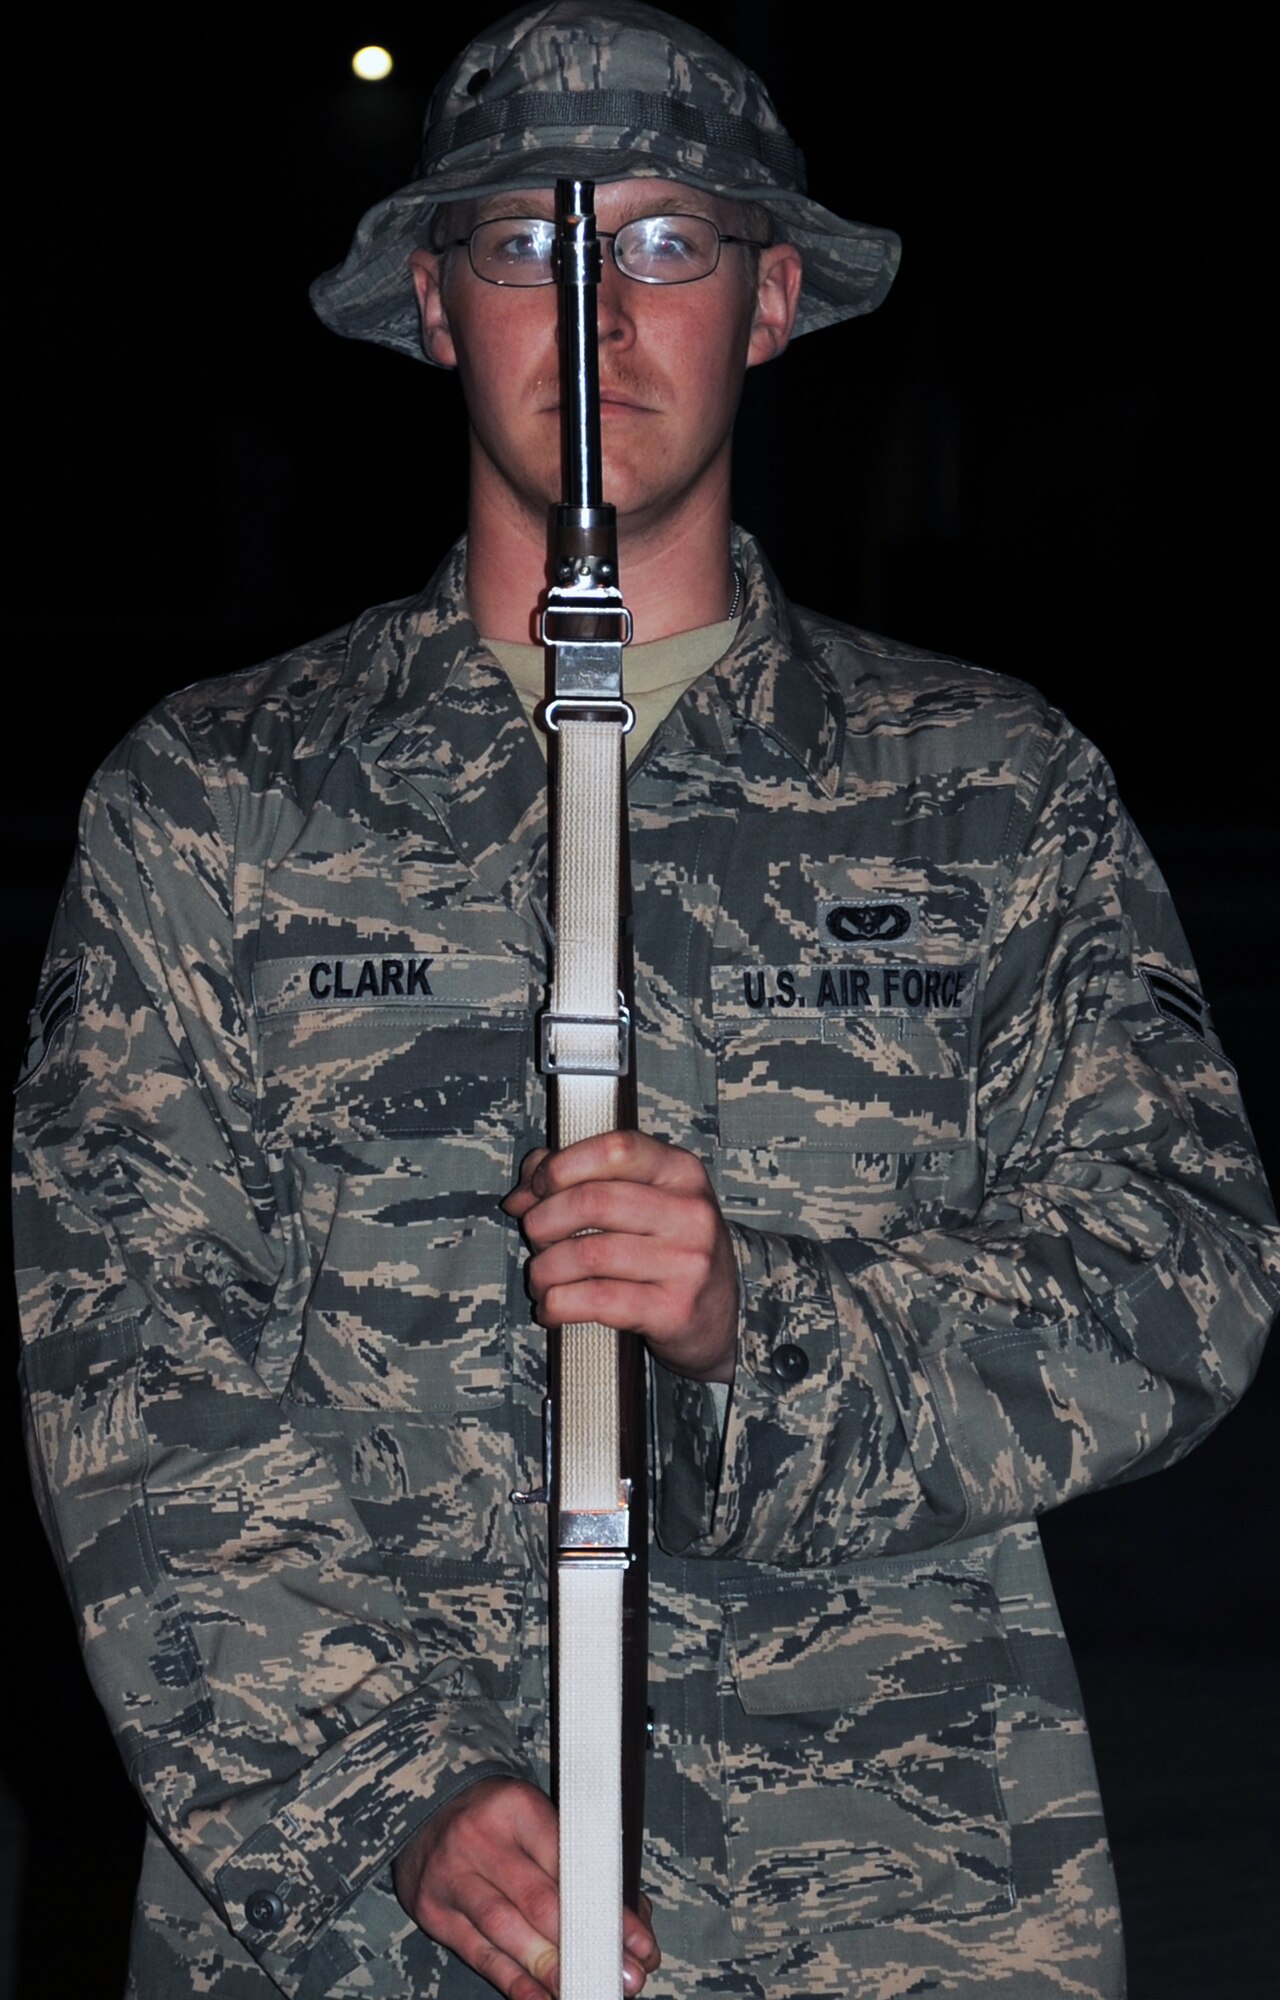 Airman 1st Class Ben Clark, an Airman assigned to the 380th Air Expeditionary Wing, practices for his participation in a deployed honor guard Jan. 5, 2009, at a non-disclosed location in Southwest Asia.  The deployed honor guard supports official ceremonies held by the wing.  The 380th AEW is comprised of four groups and 12 squadrons and the wing?s deployed mission includes air refueling, surveillance, and reconnaissance in support of overseas contingency operations in Southwest Asia. (U.S. Air Force Photo/Tech. Sgt. Scott T. Sturkol/Released)